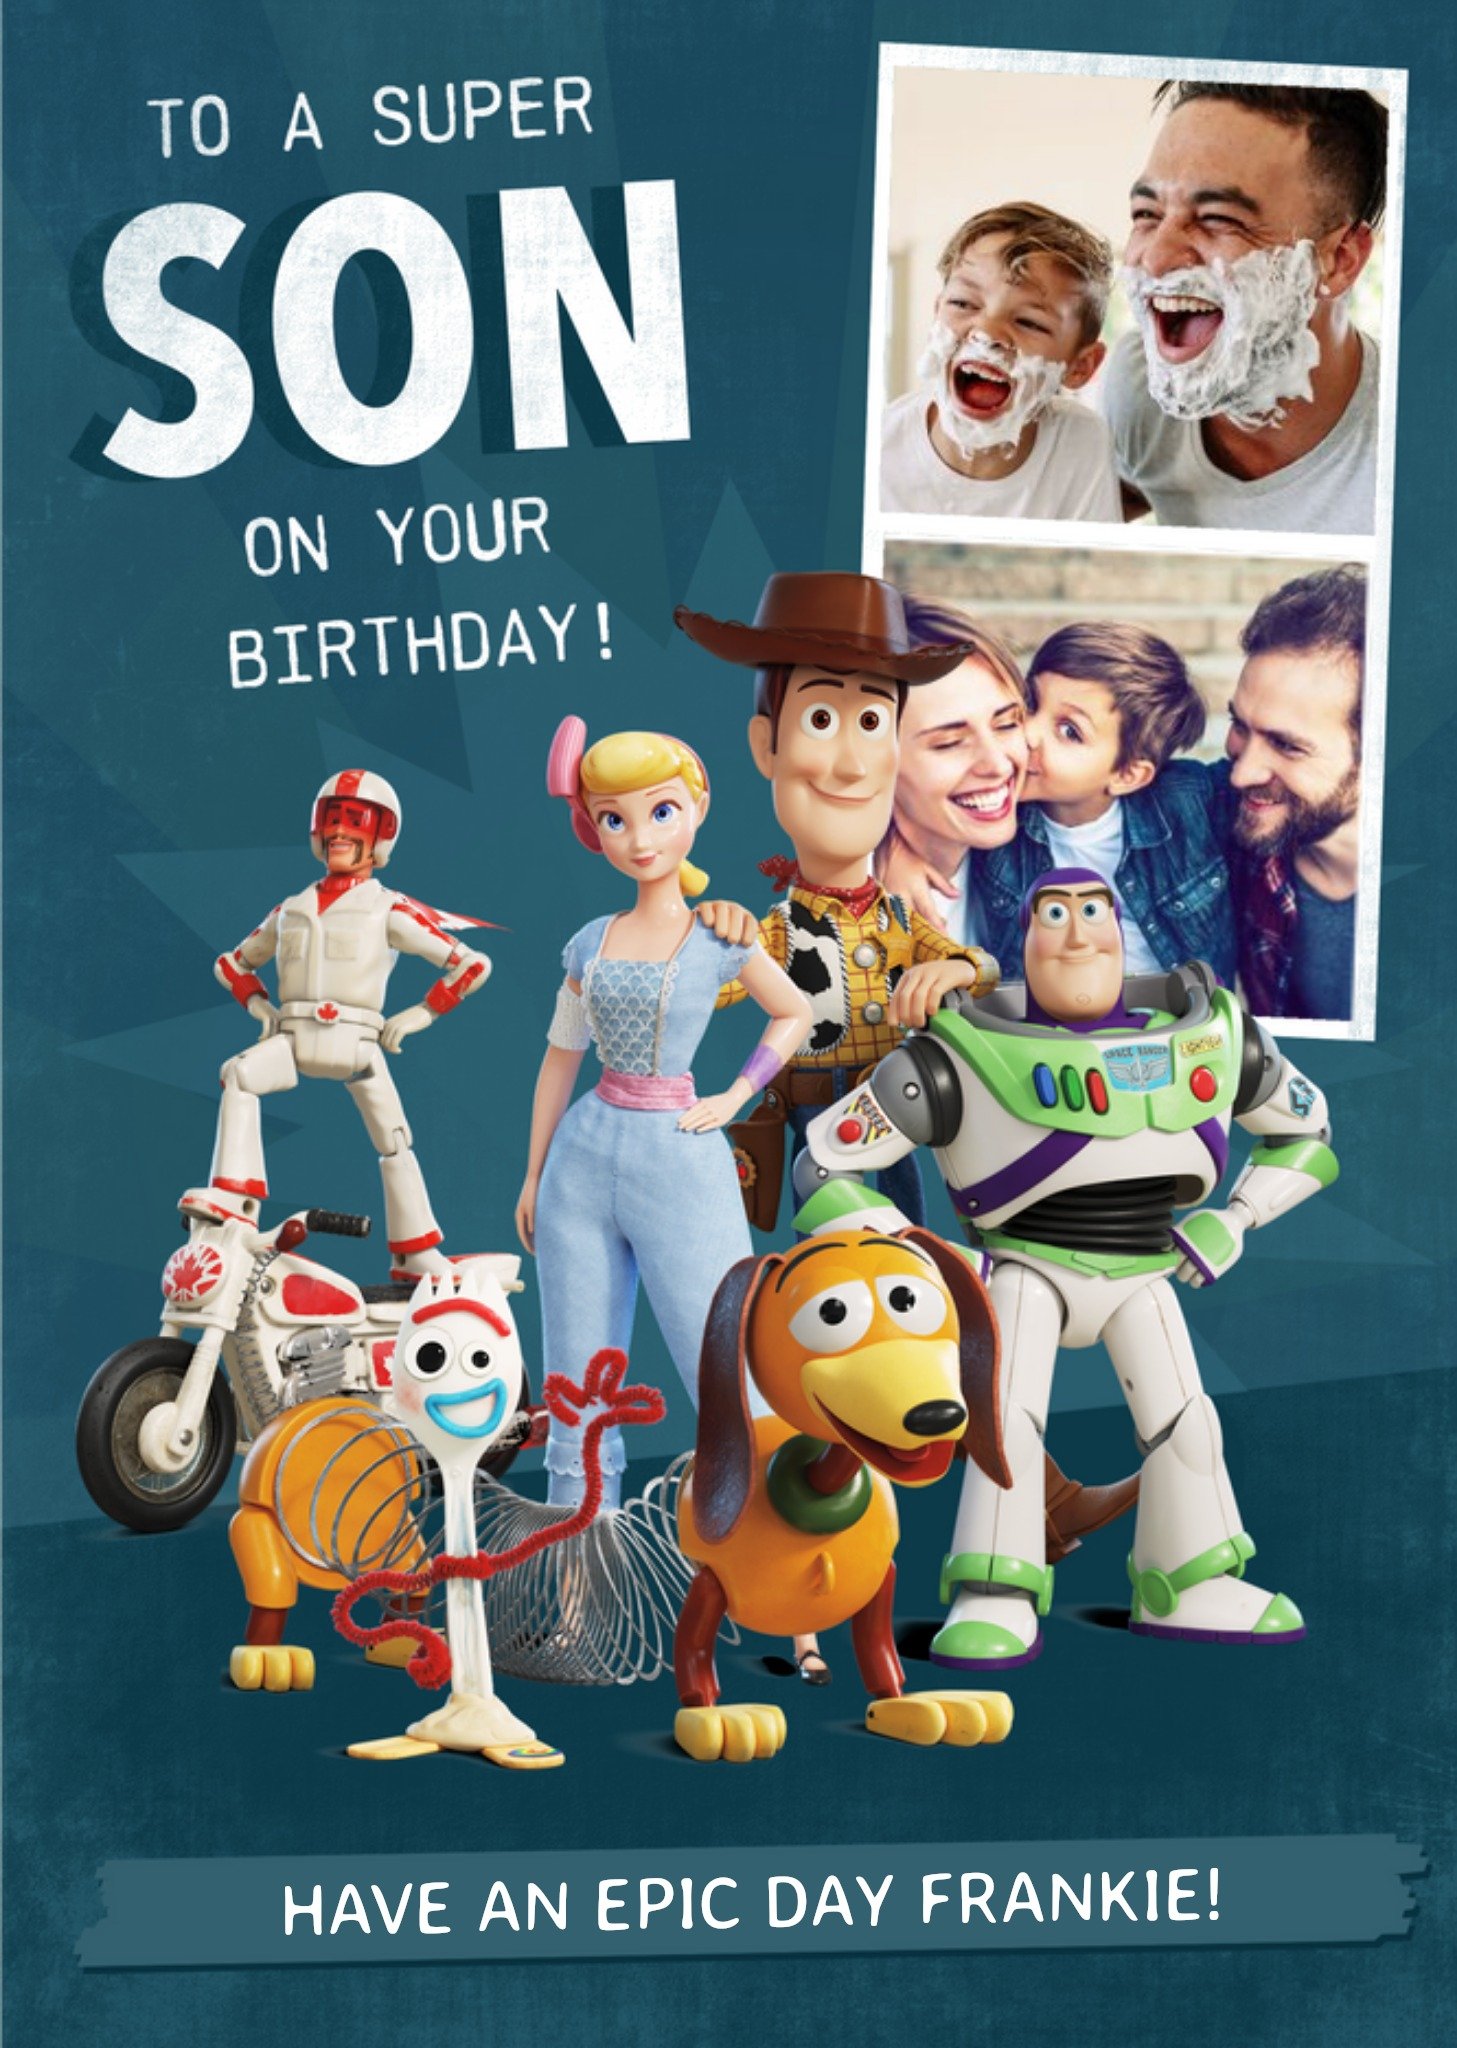 Toy Story 4 - To A Super Son Photo Card Ecard